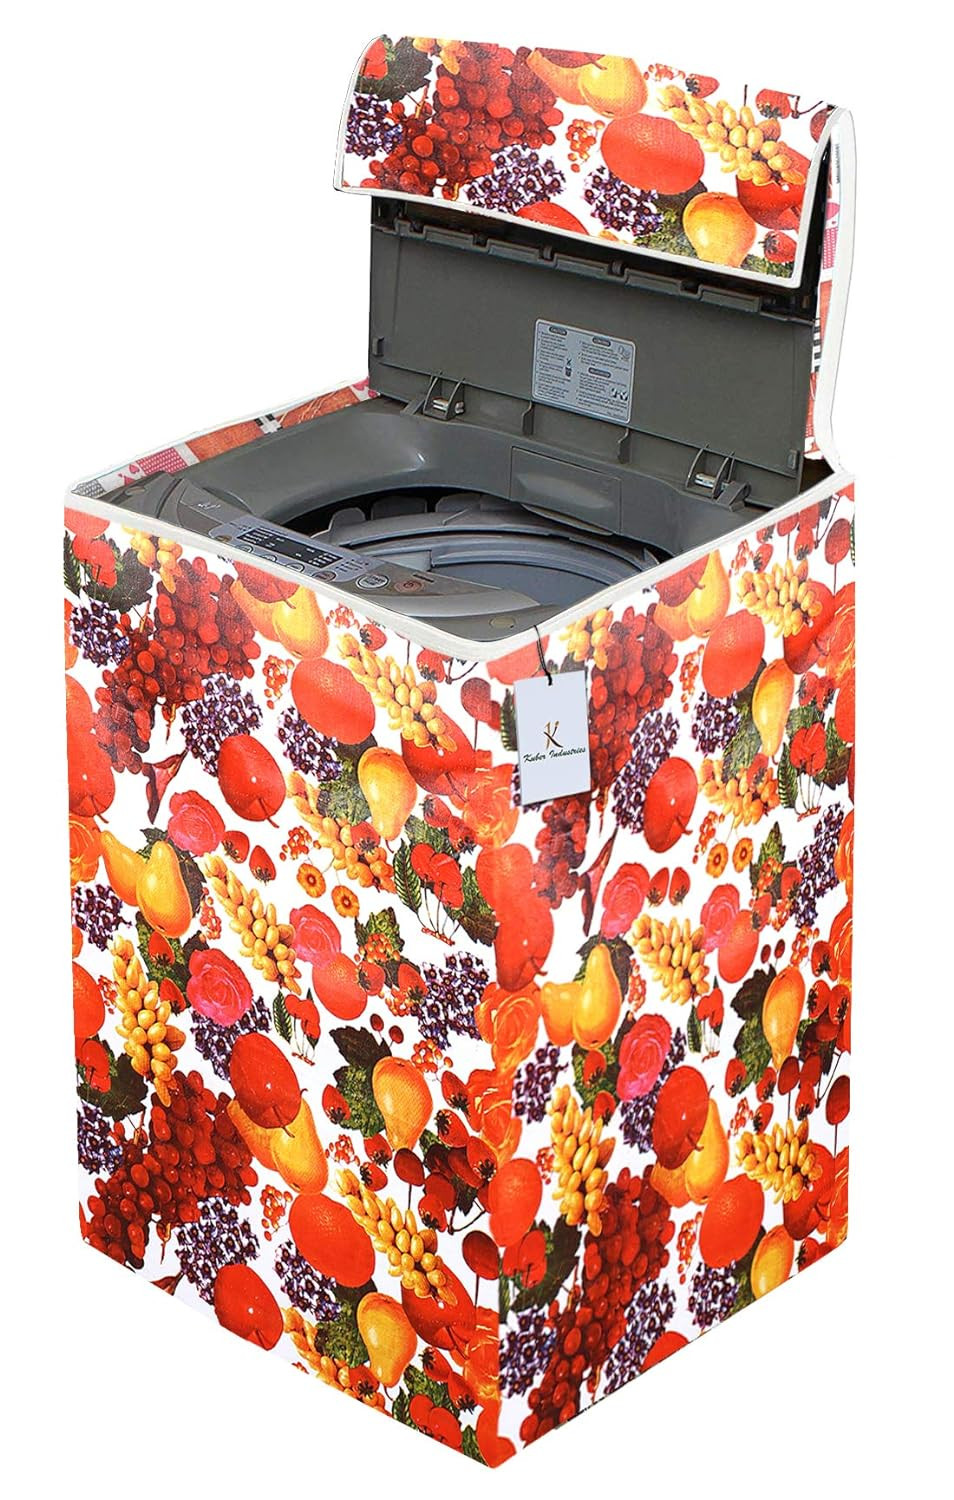 Kuber Industries Fruits Design PVC Top Load Fully Automatic Washing Machine Cover (Red & White) CTKTC33329